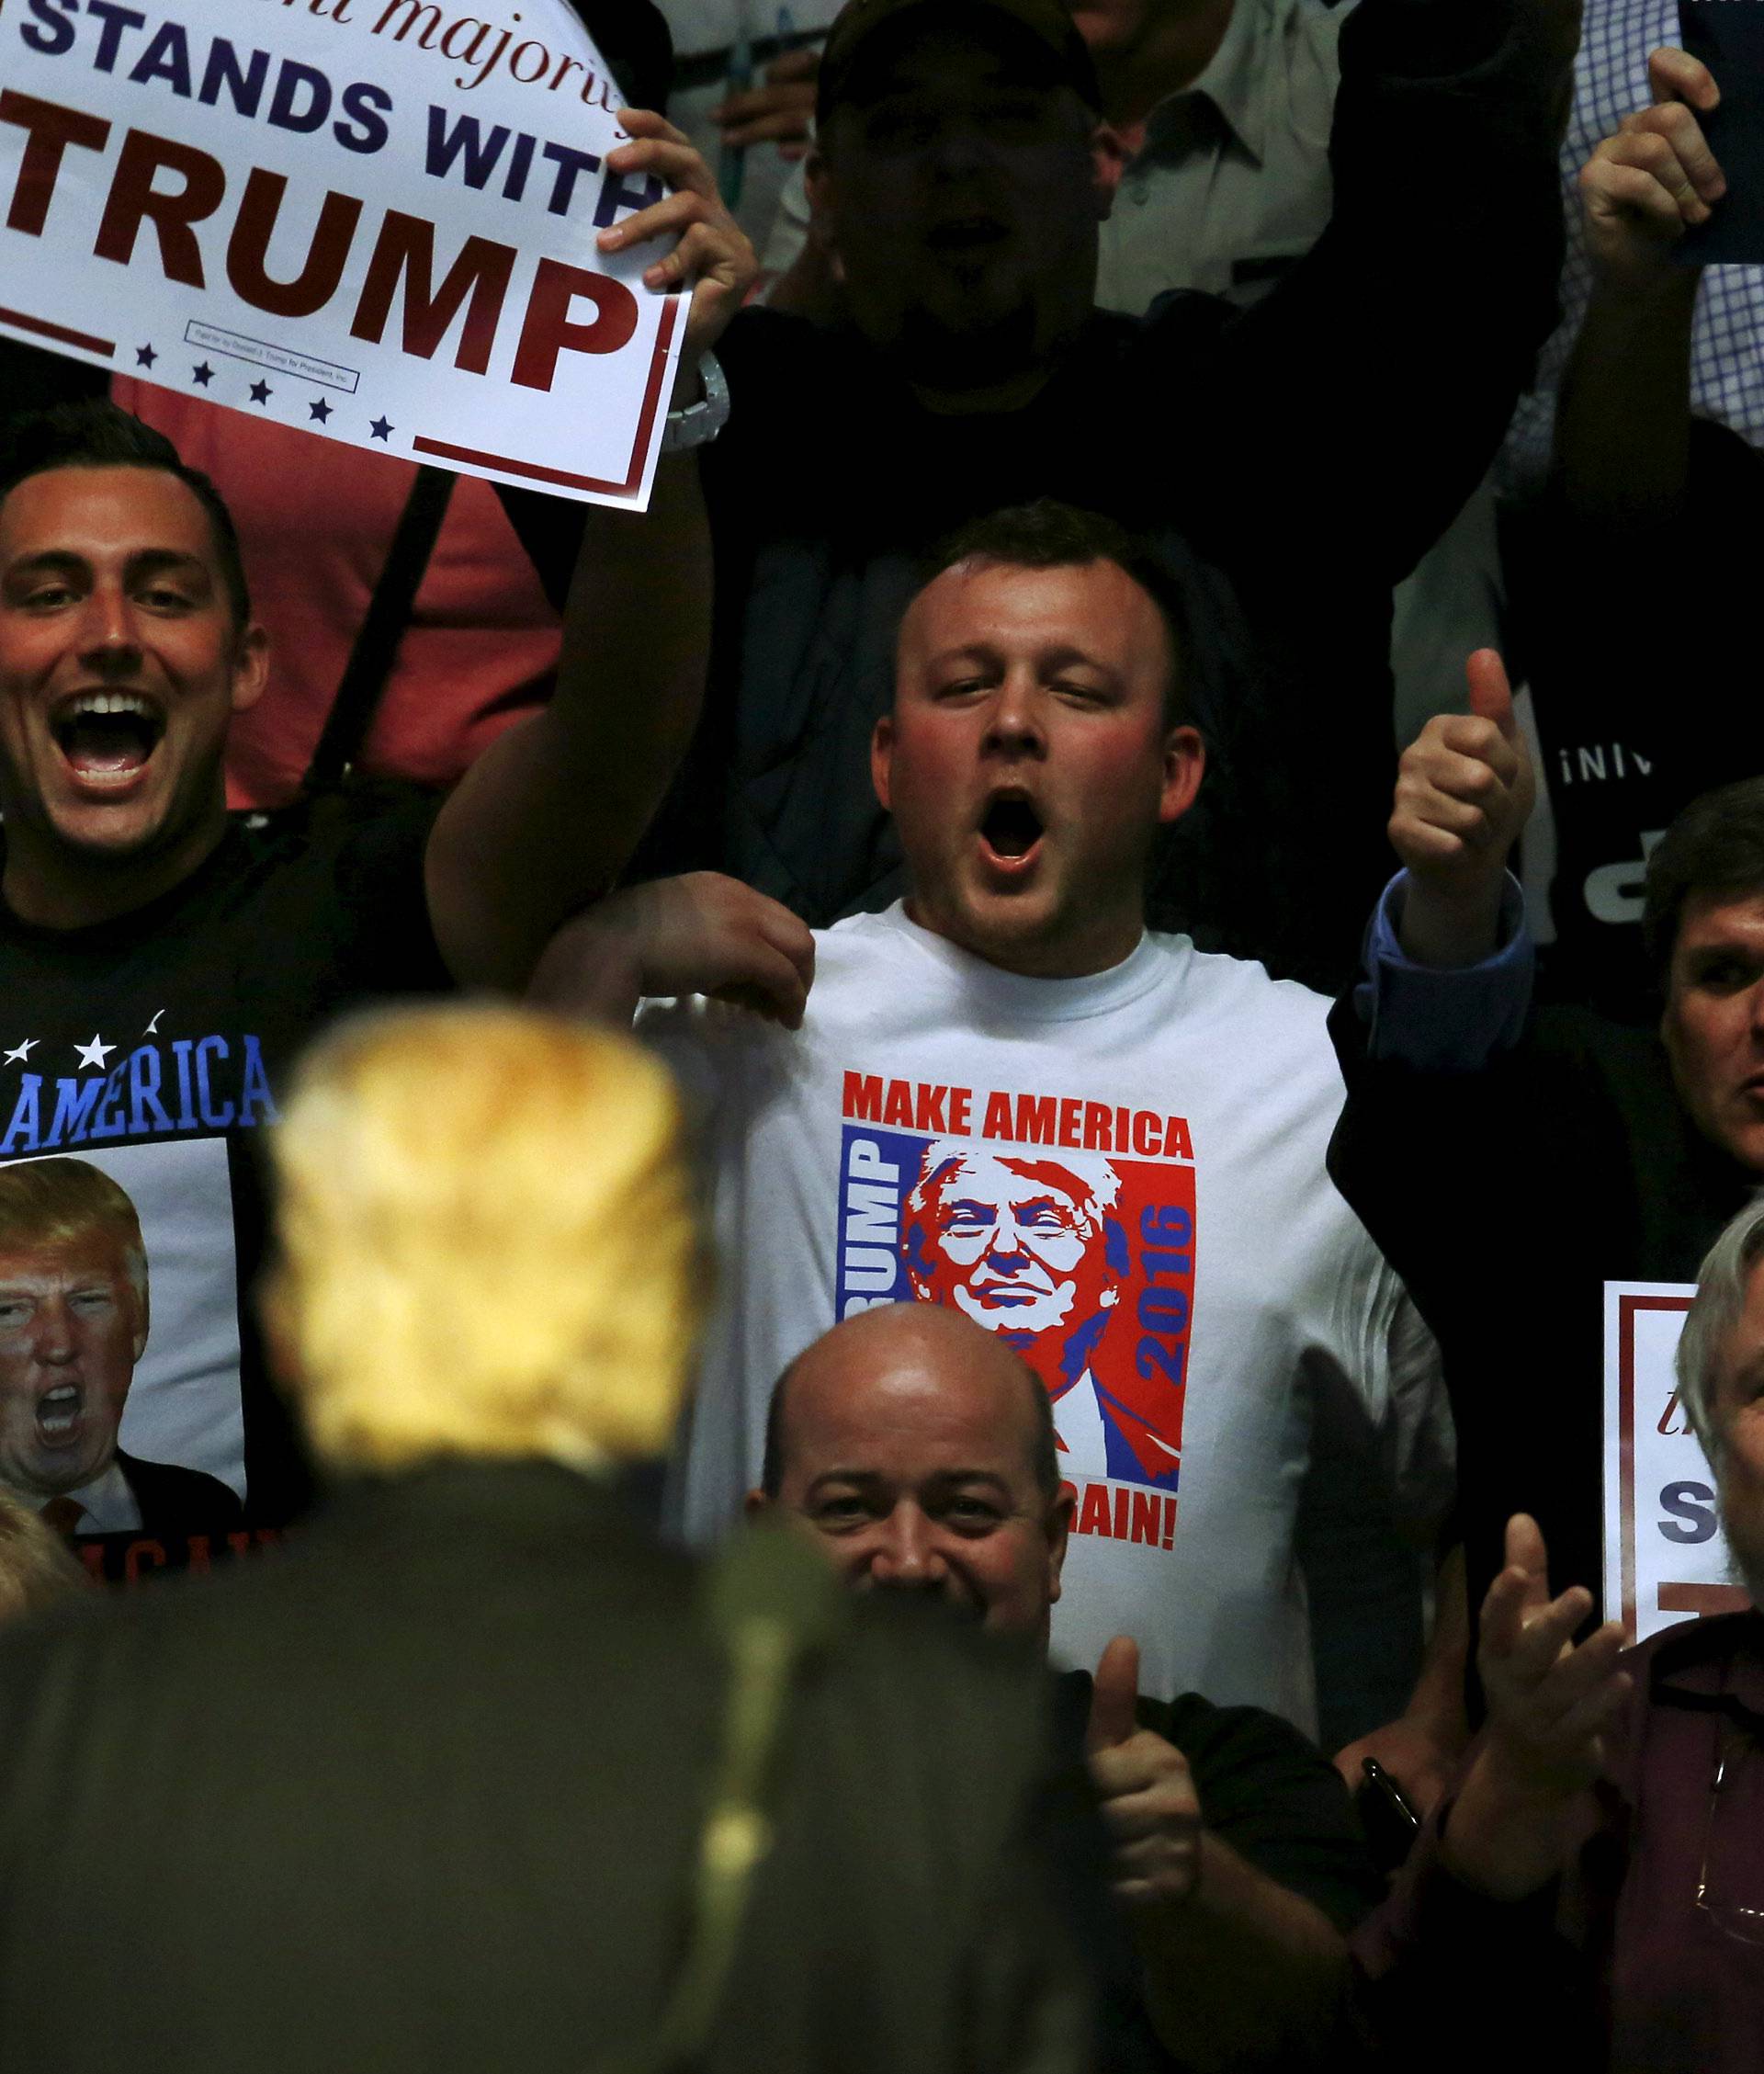 Supporters cheer for U.S. Republican presidential candidate Donald Trump during a campaign event in Indianapolis